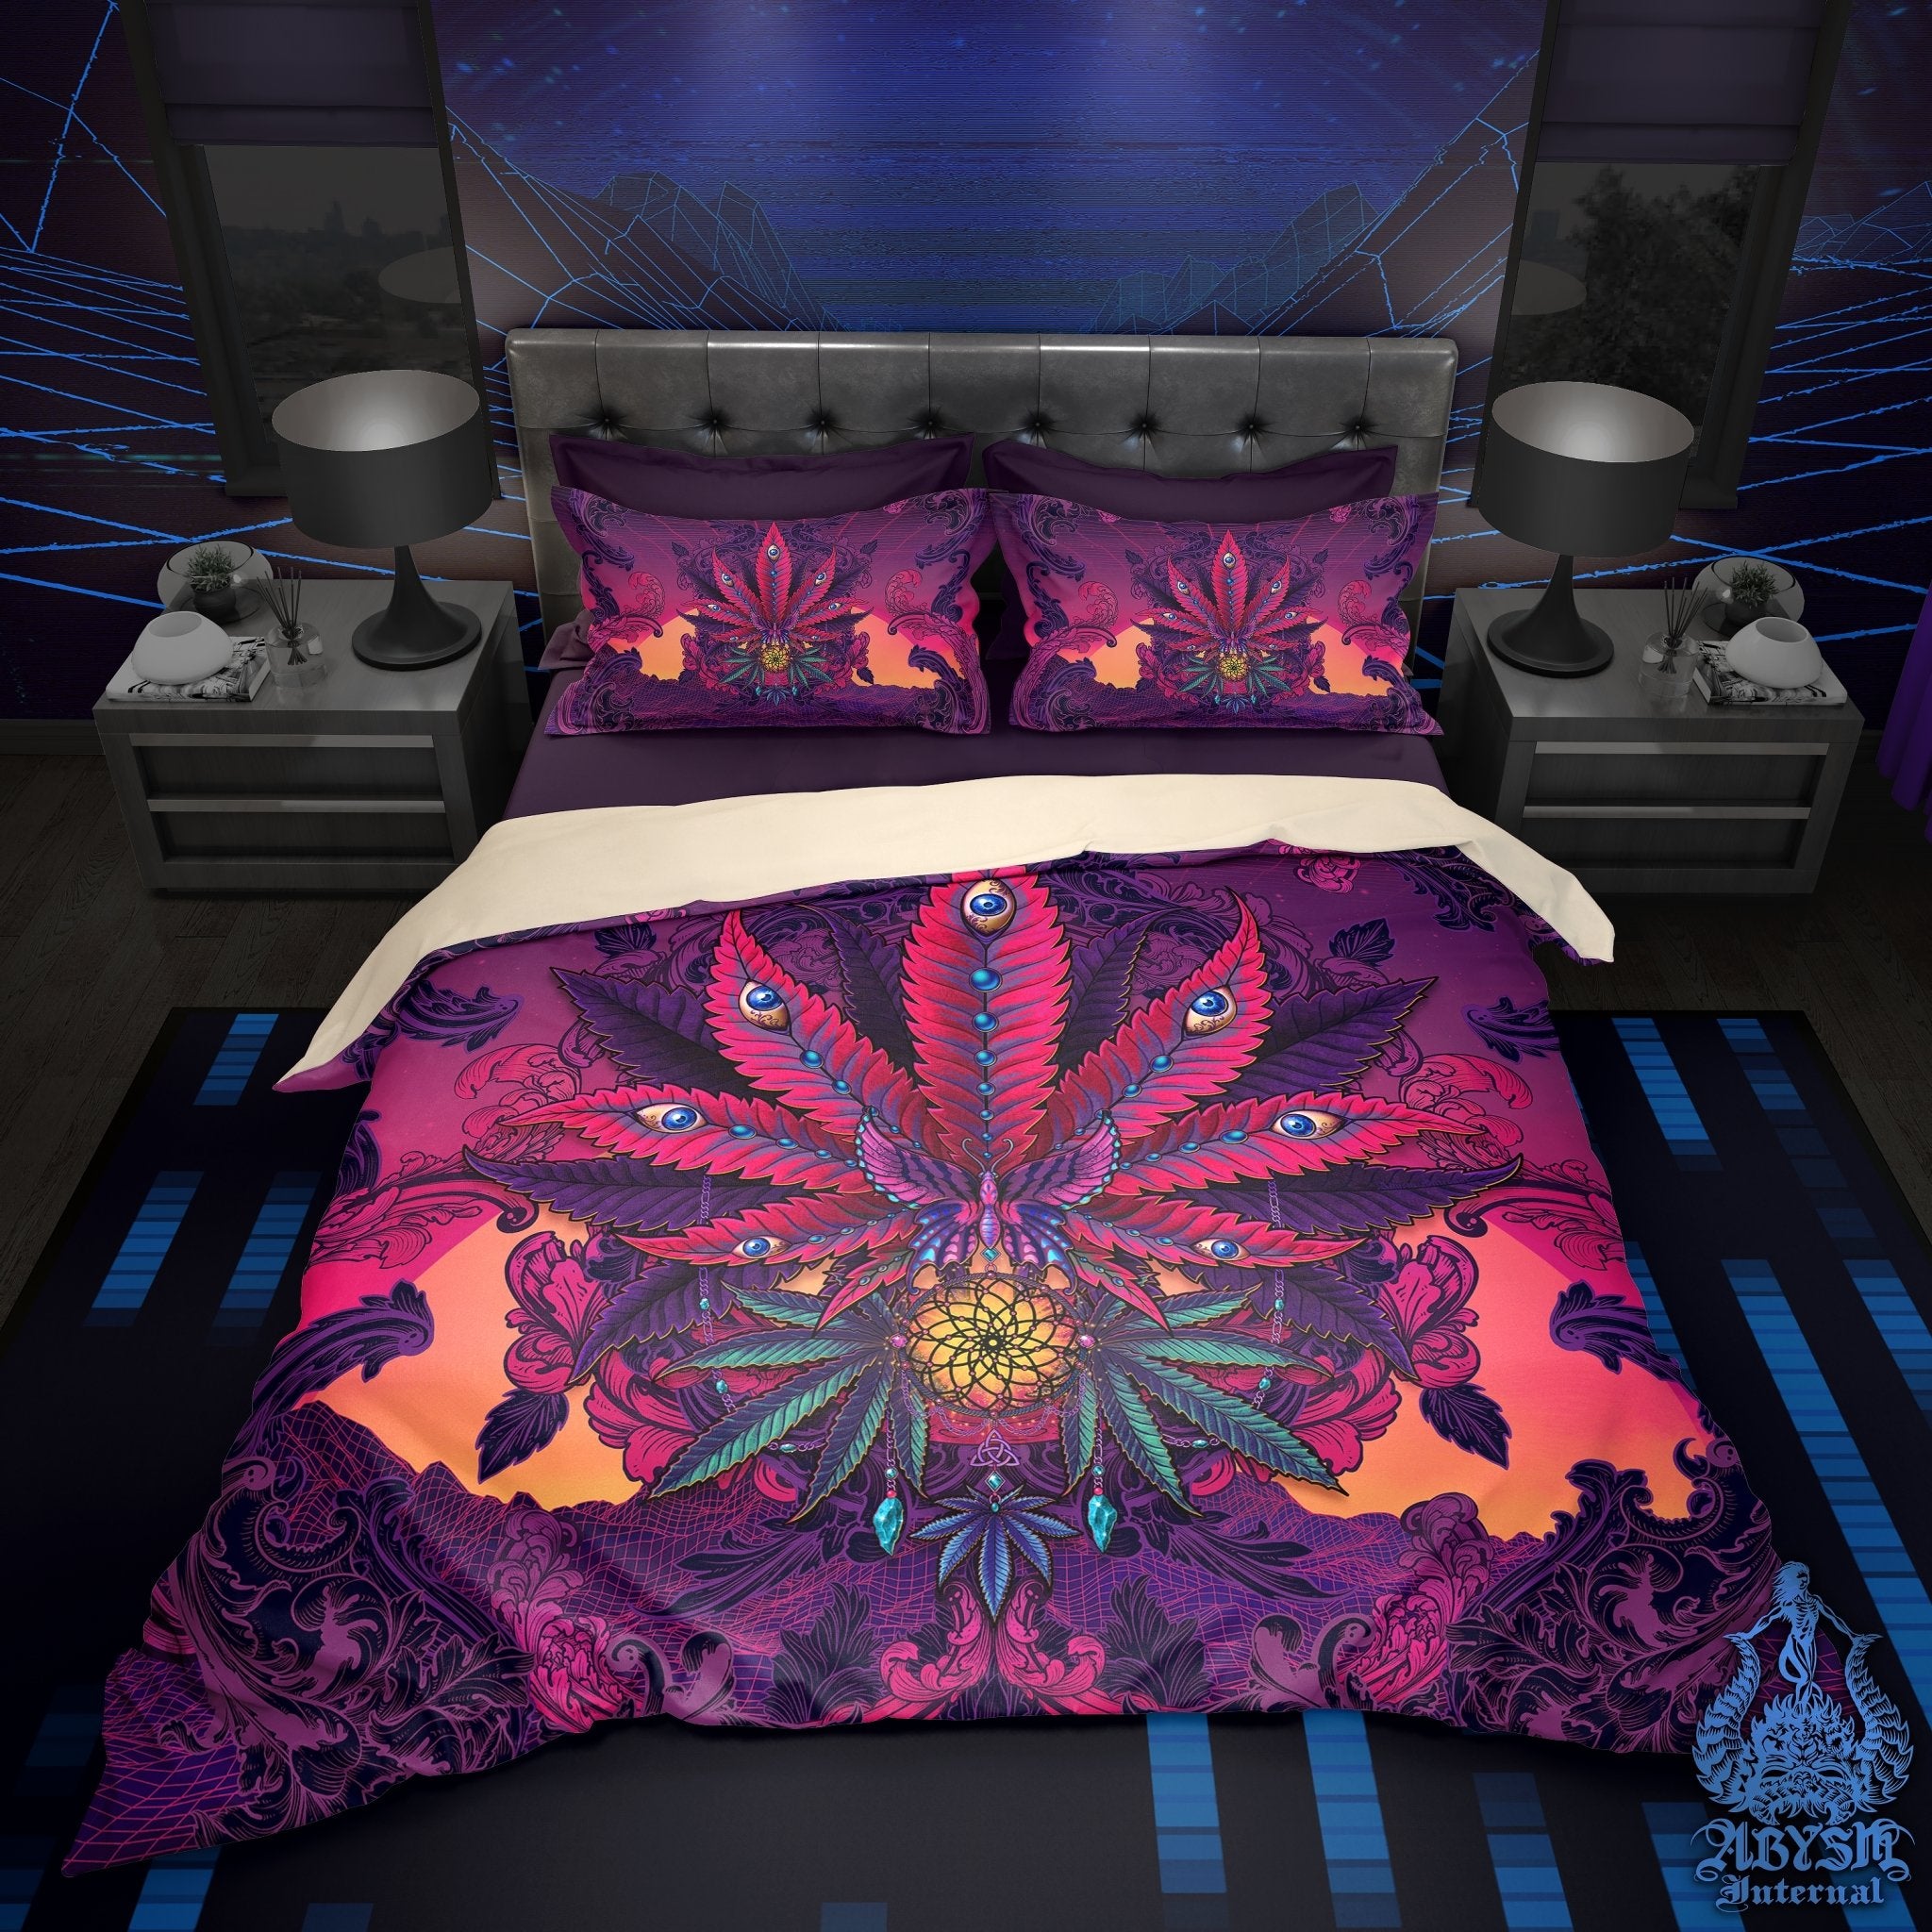 Psychedelic Weed Bedding Set, Comforter and Duvet, Vaporwave Bed Cover and Retrowave Bedroom Decor, King, Queen and Twin Size, Synthwave, Psychedelic 80s Gamer Room Art - Cannabis 420 - Abysm Internal